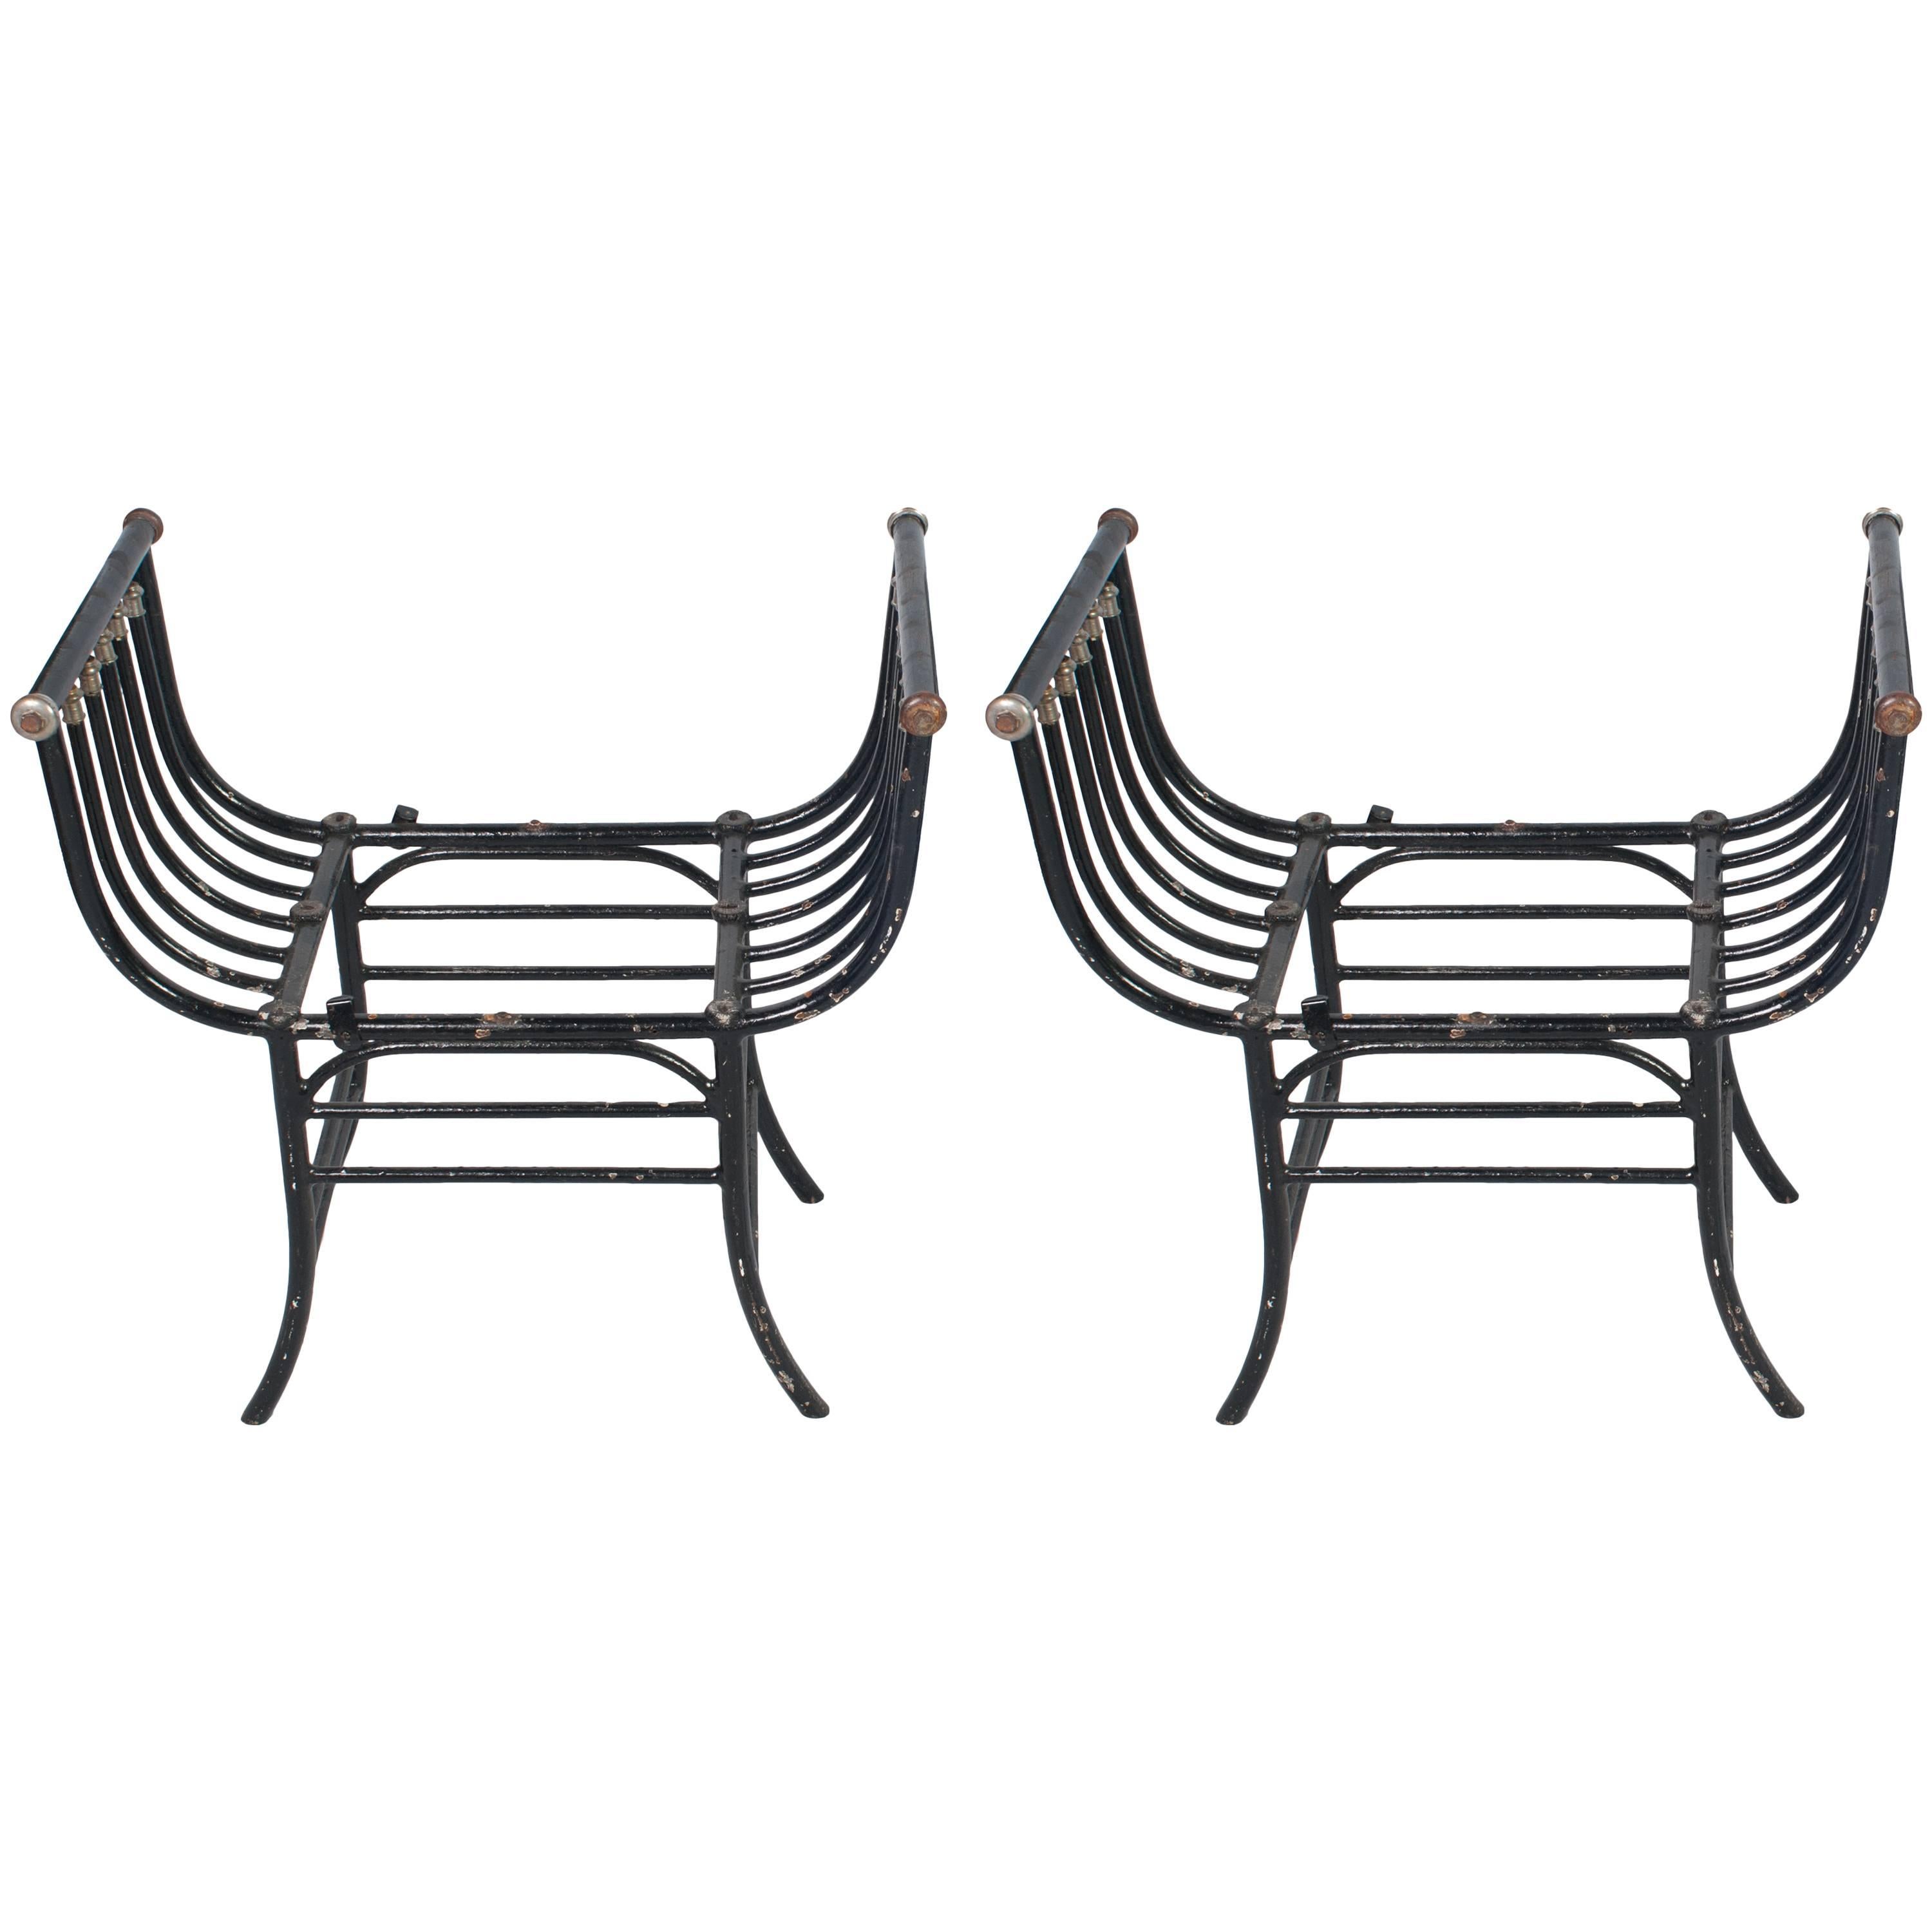 Pair of Black Painted Wrought Iron Window Seats or Stools